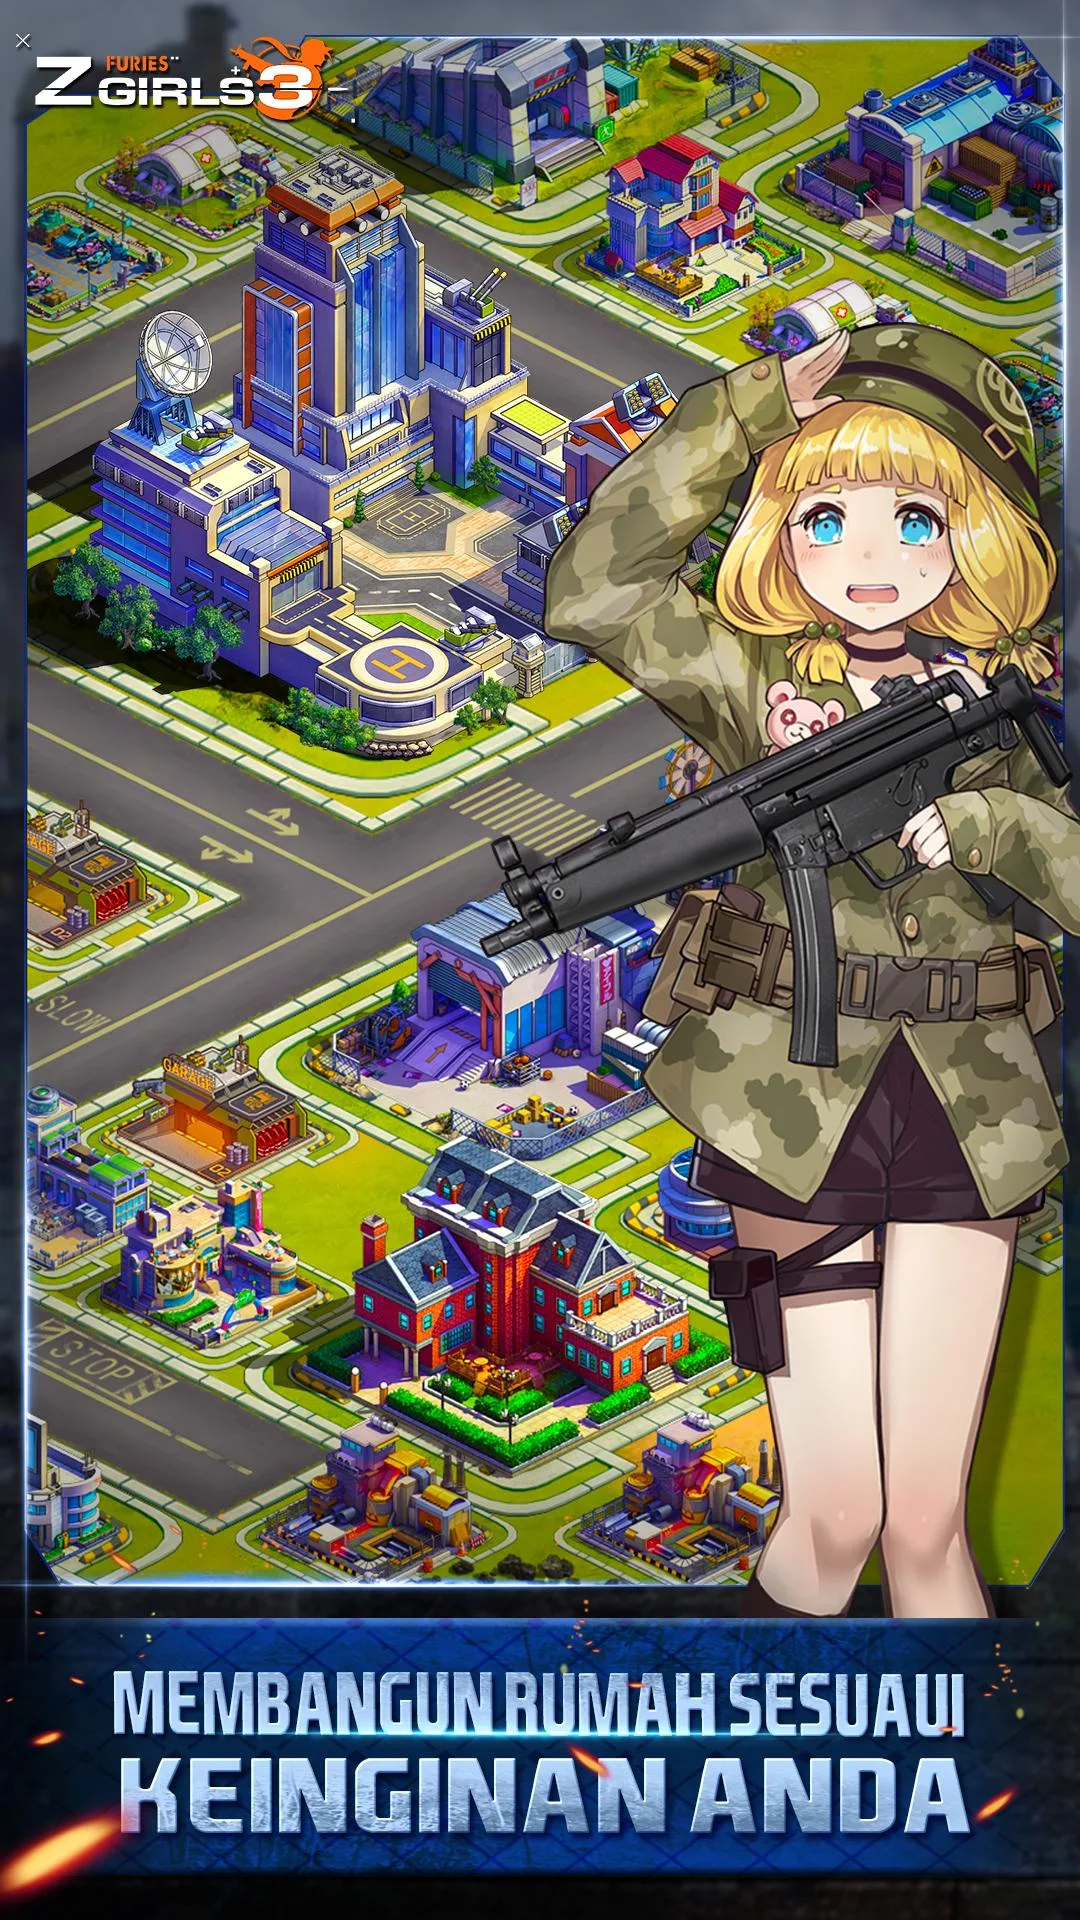 &#91;Android&#93; Zgirls 3: Furies